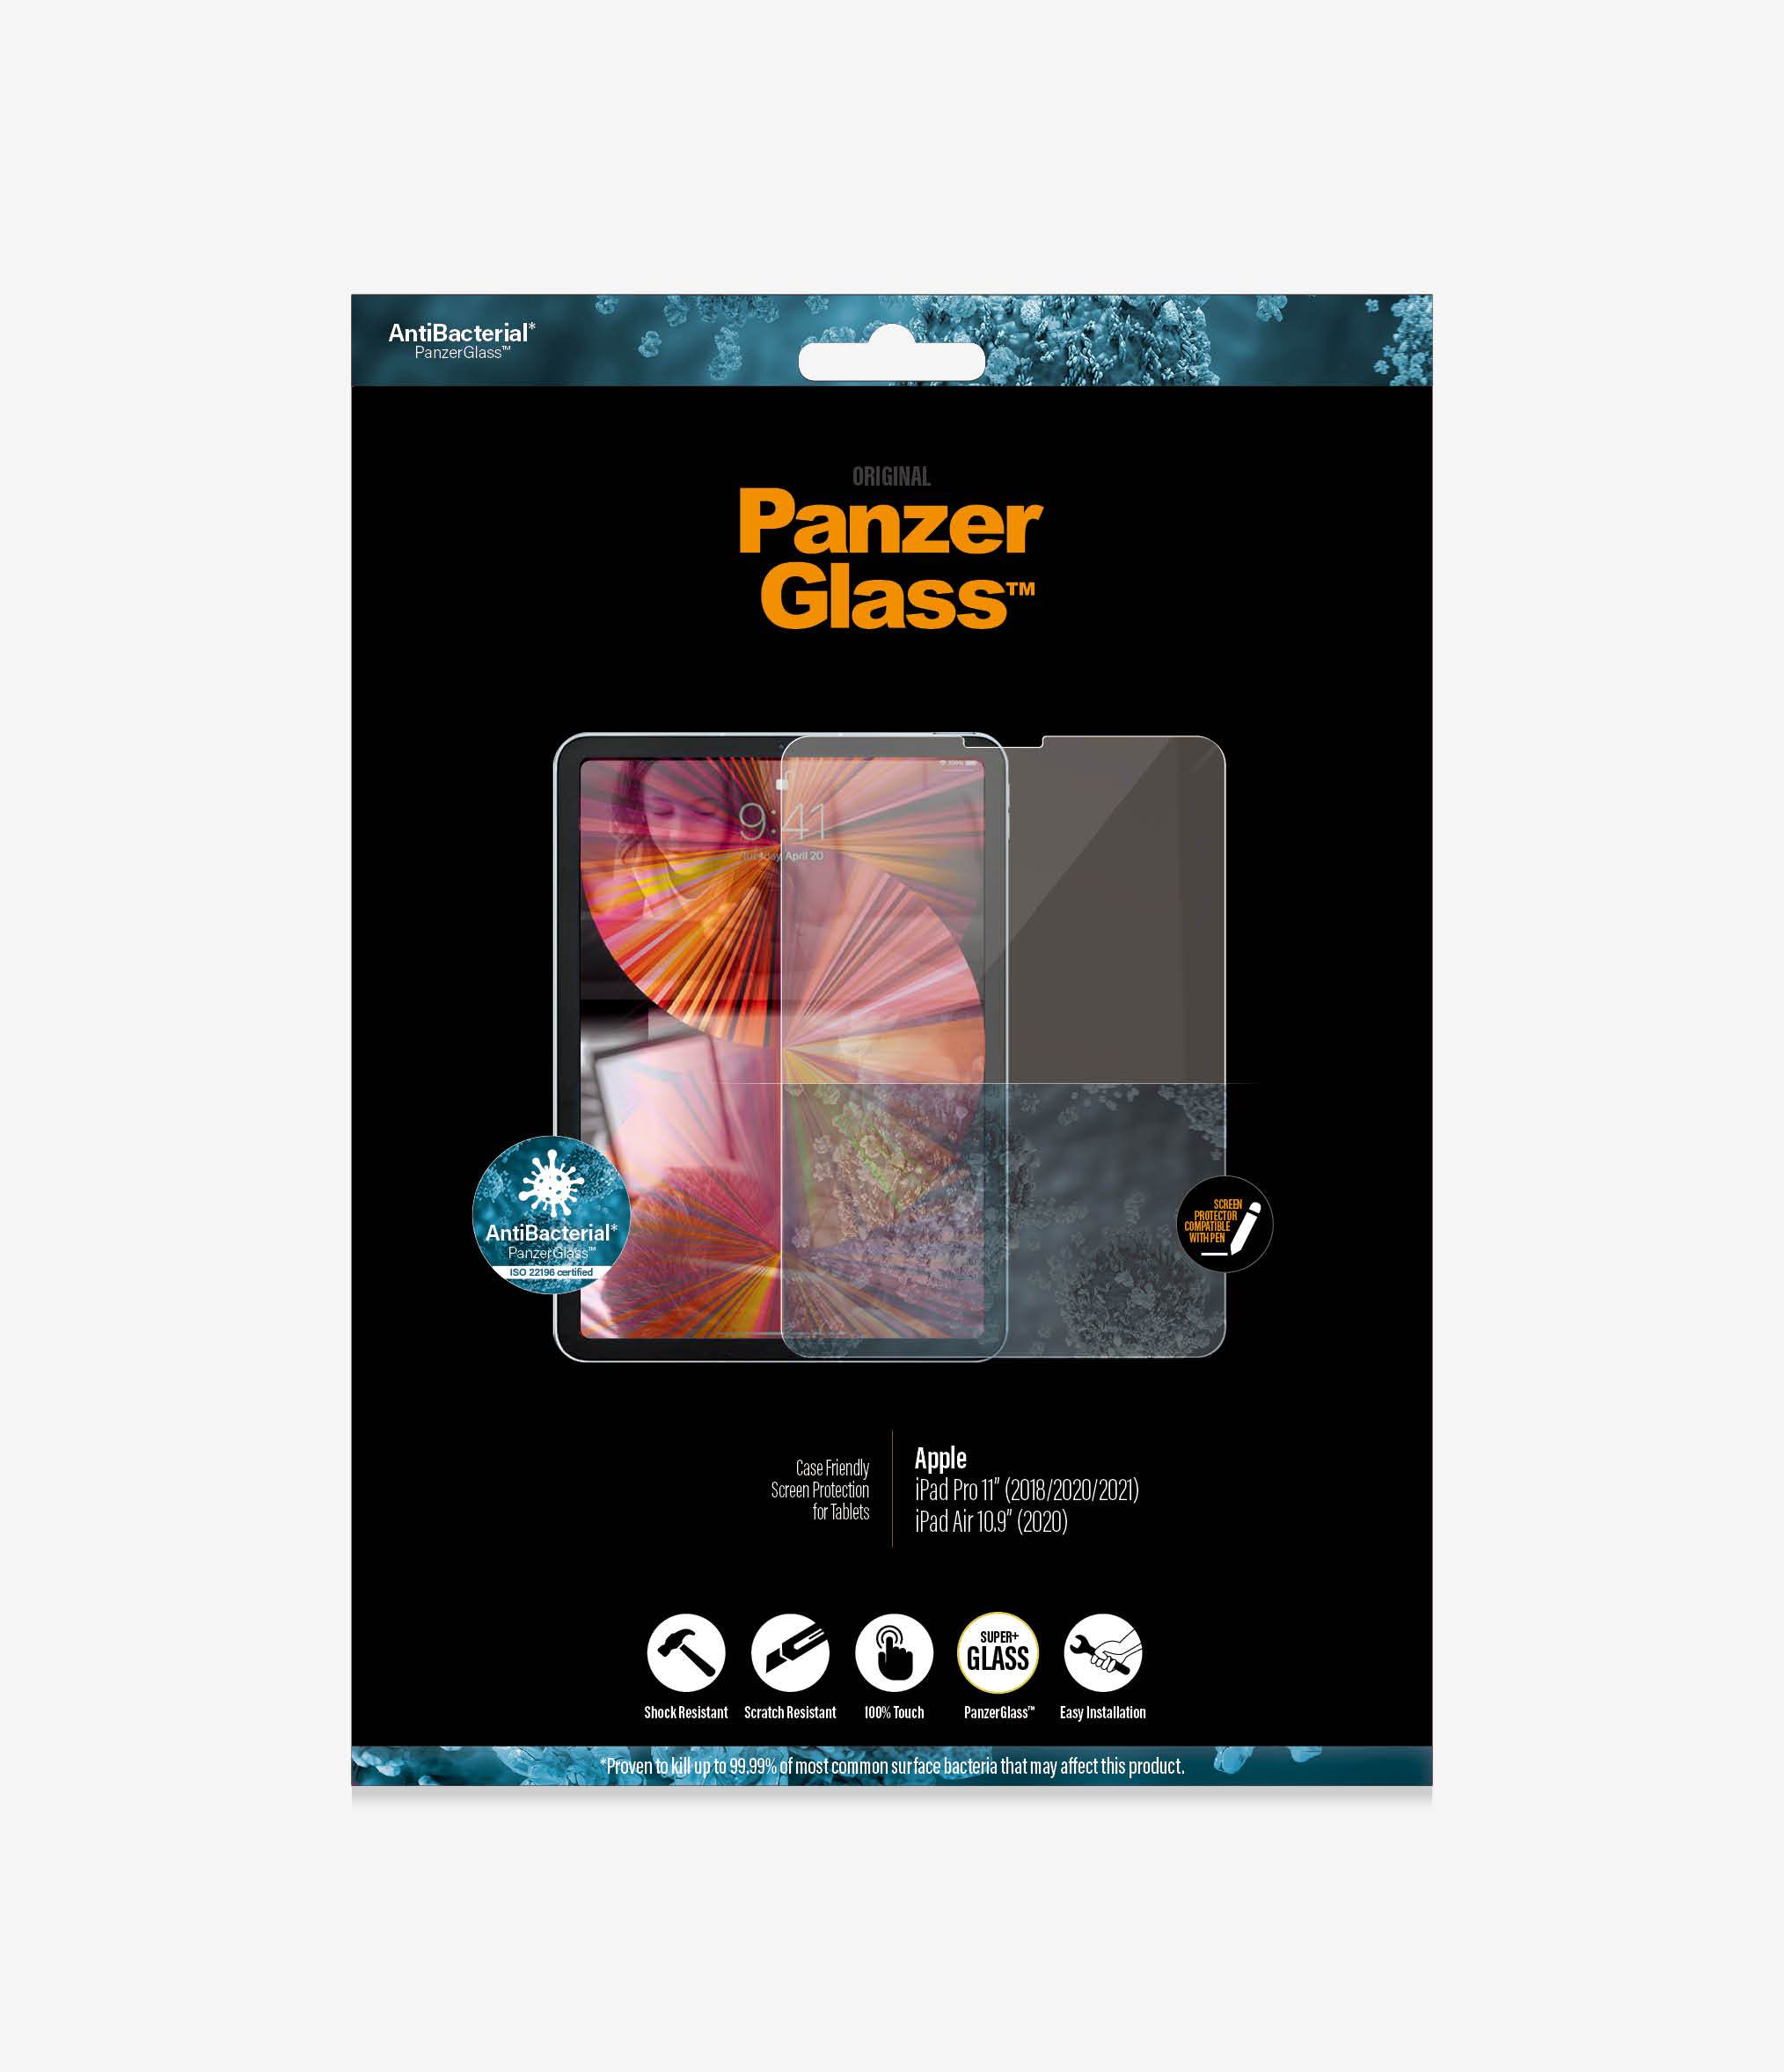 PanzerGlass™ Apple iPad Pro 11' (2018/2020/2021) & iPad Air (2020) - AntiBacterial (2655) - Screen Protector - Full Frame Coverage, Rounded edges